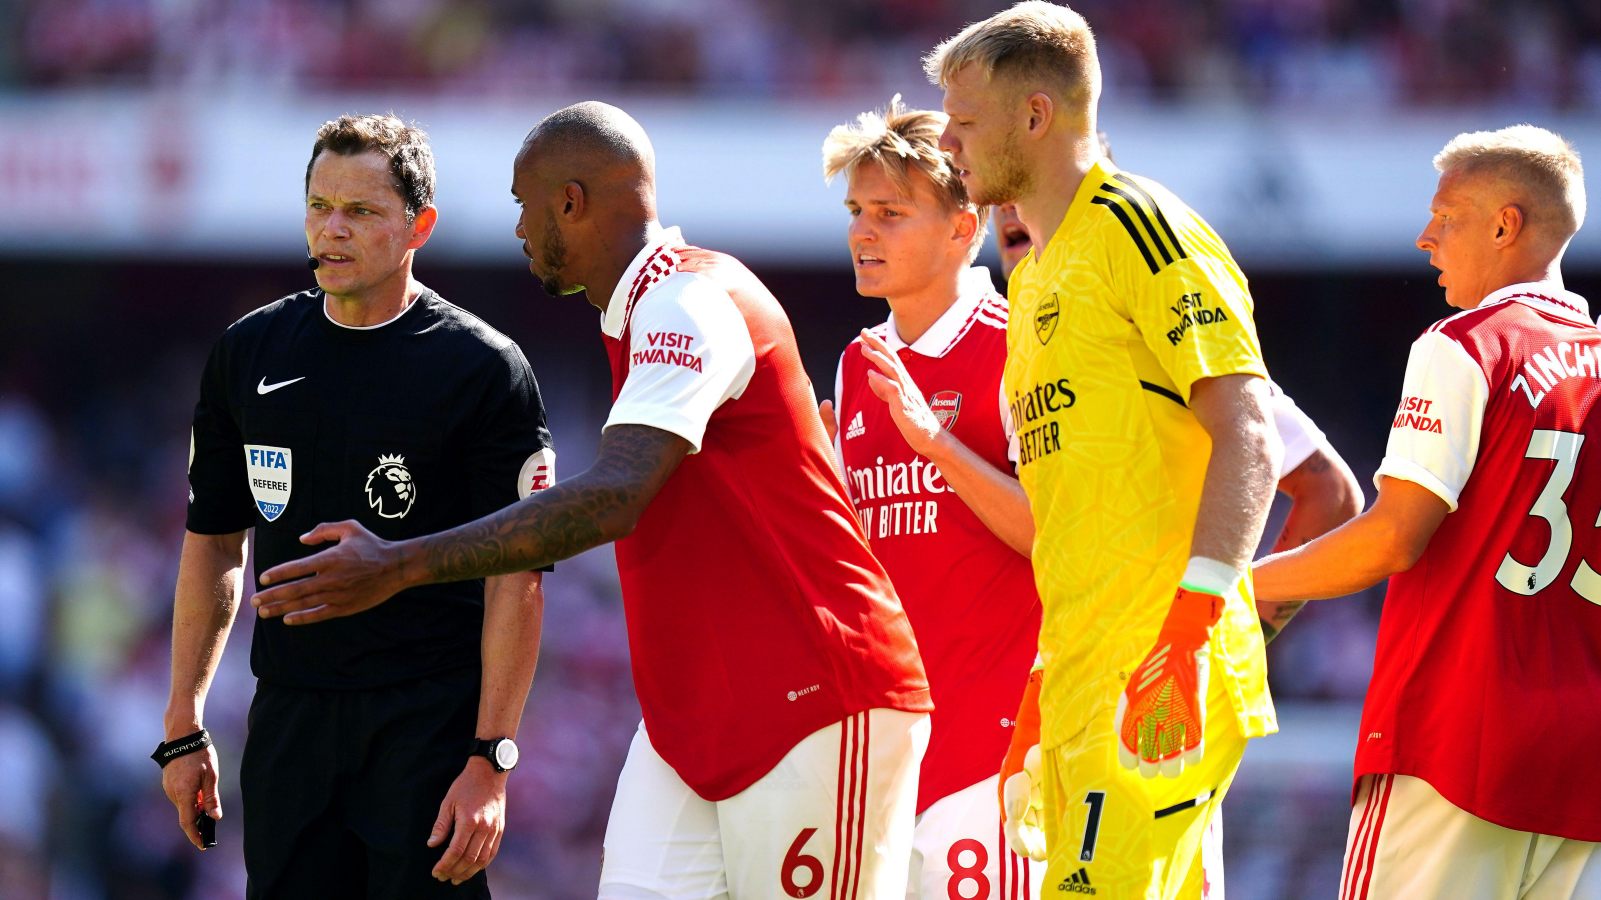 Premier League: FA fines Arsenal $226,770 for referee abuse, collects whopping $1 million from 15 Premier League clubs, Check OUT